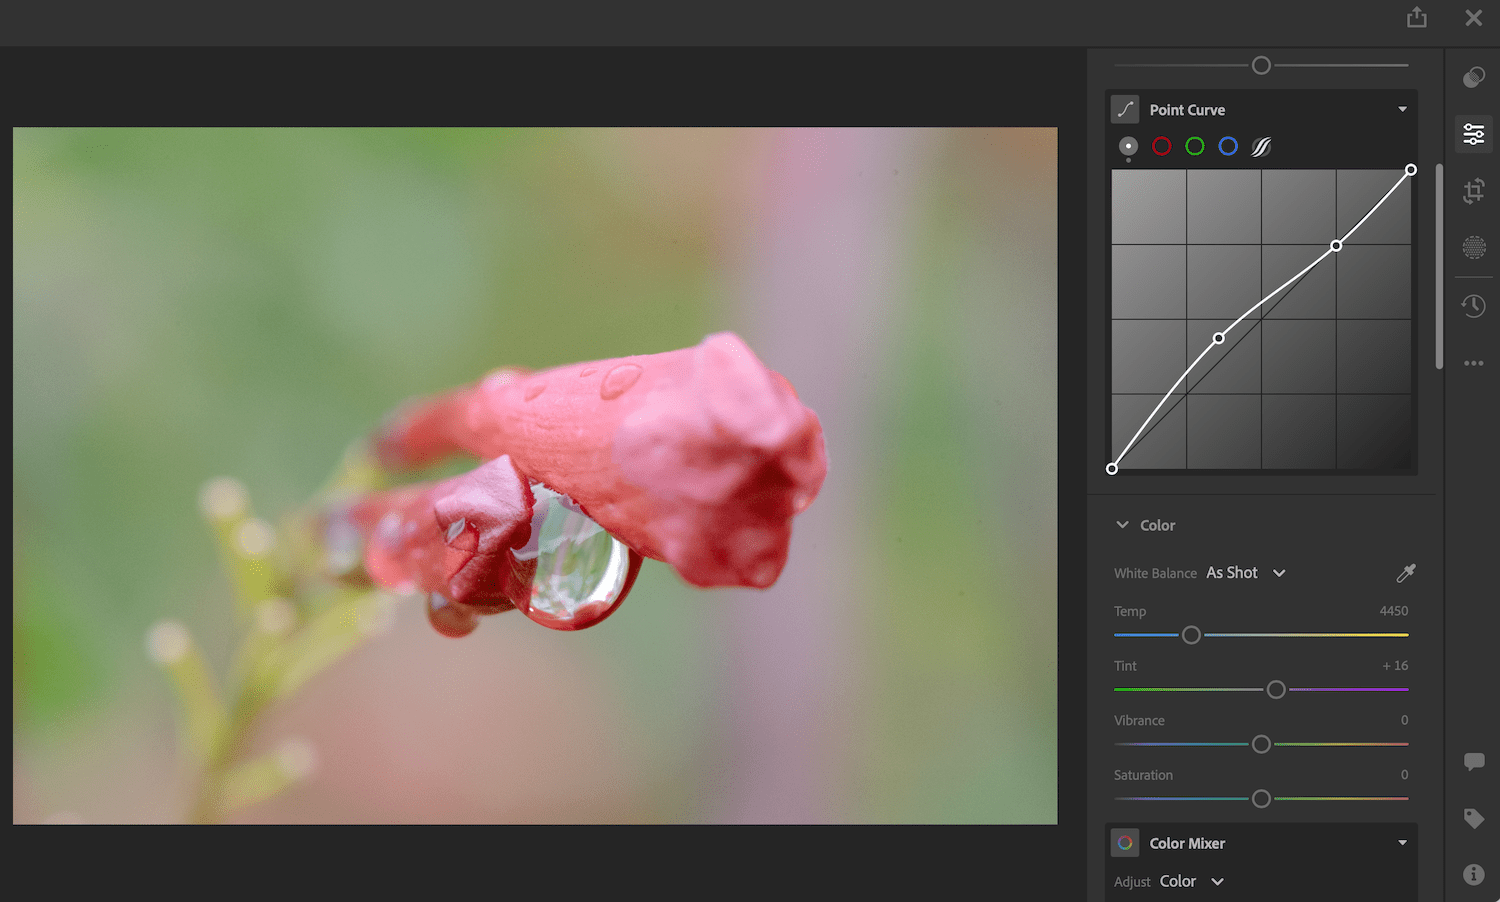 Lightroom vs. Lightroom Classic: The editing interface of Lightroom. A red flower is shown, along with Point Curve, Temp, Tint, Vibrance, and Saturation.